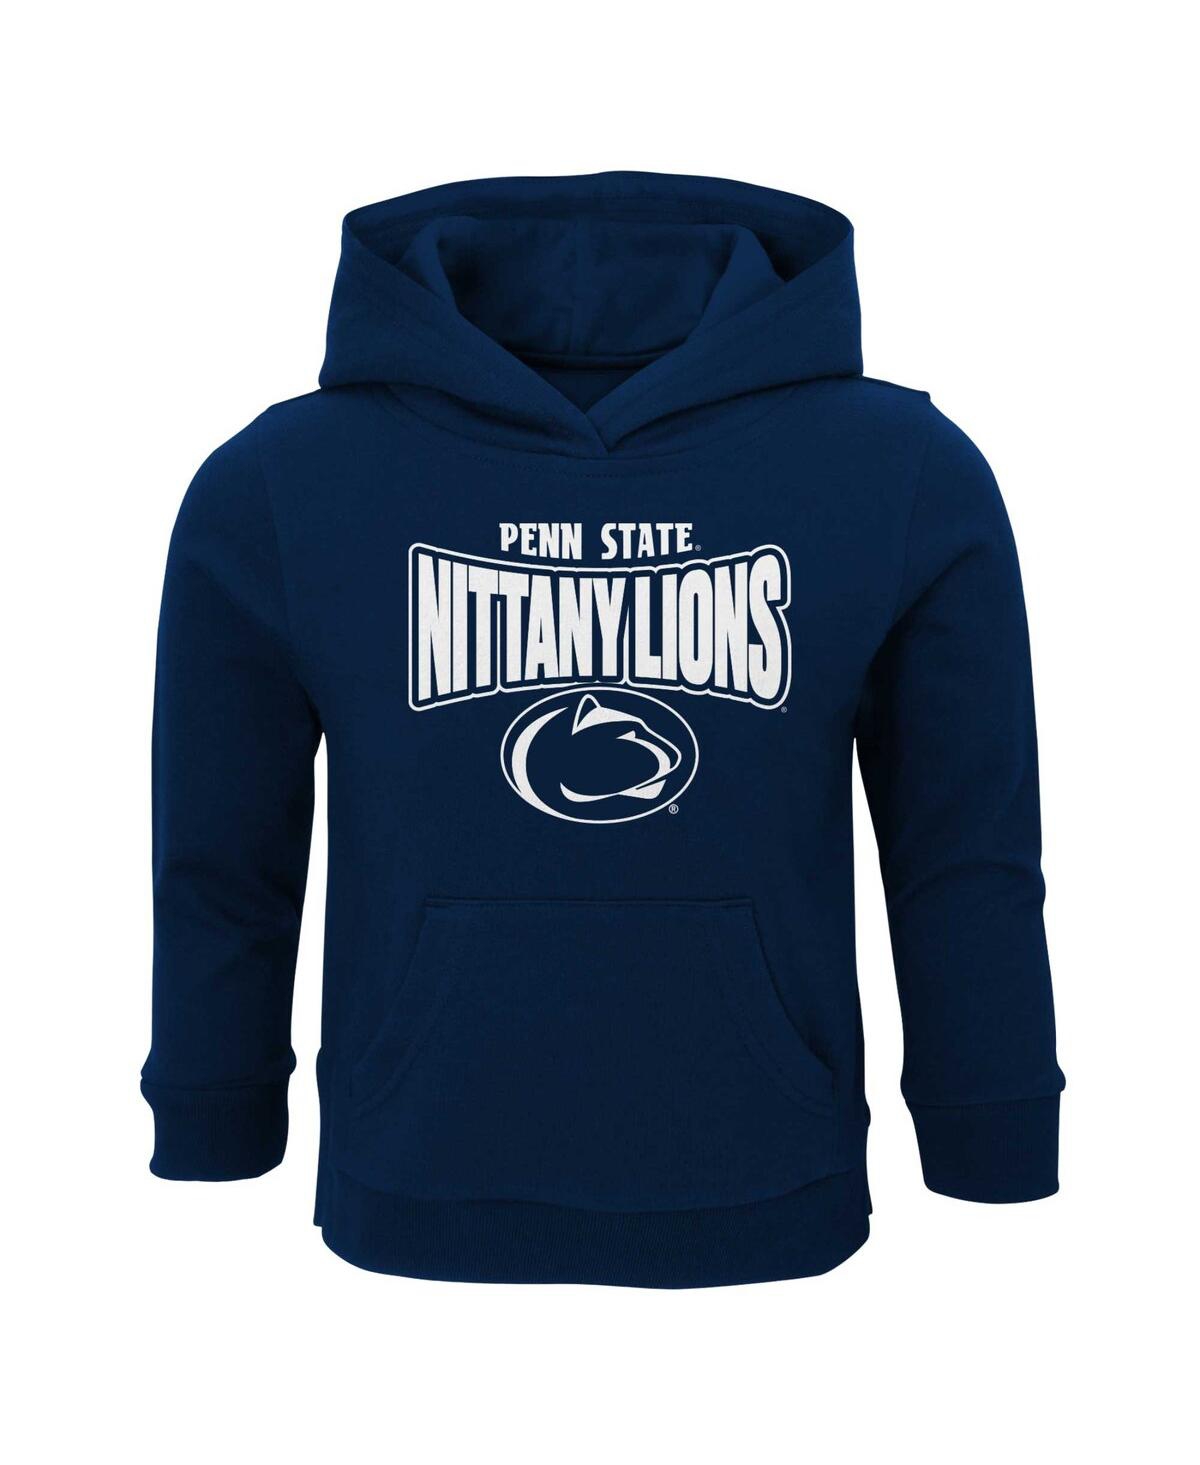 Outerstuff Babies' Toddler Boys And Girls Navy Penn State Nittany Lions Draft Pick Pullover Hoodie